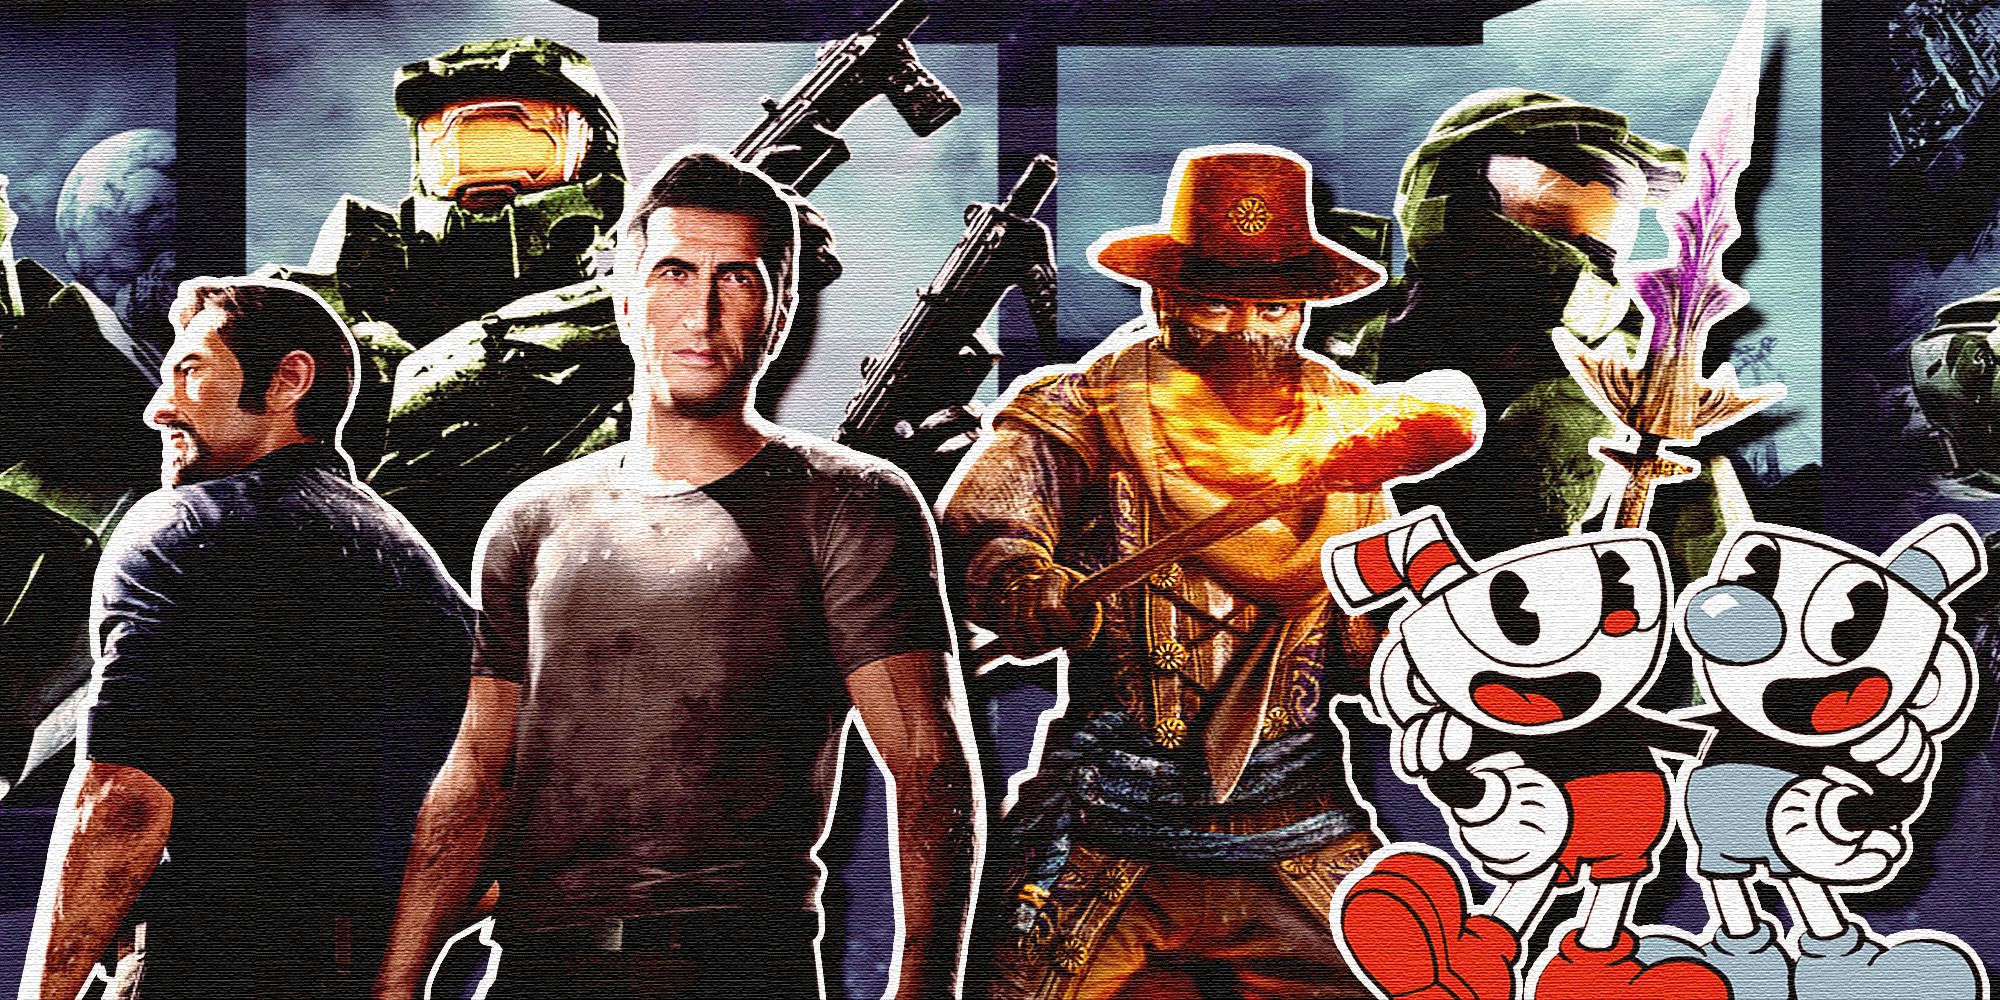 Vincent and Leo (A Way Out) standing next to an avatar character (Outward) and Cuphead and Mugman (Cuphead). In the background is Master Chief.